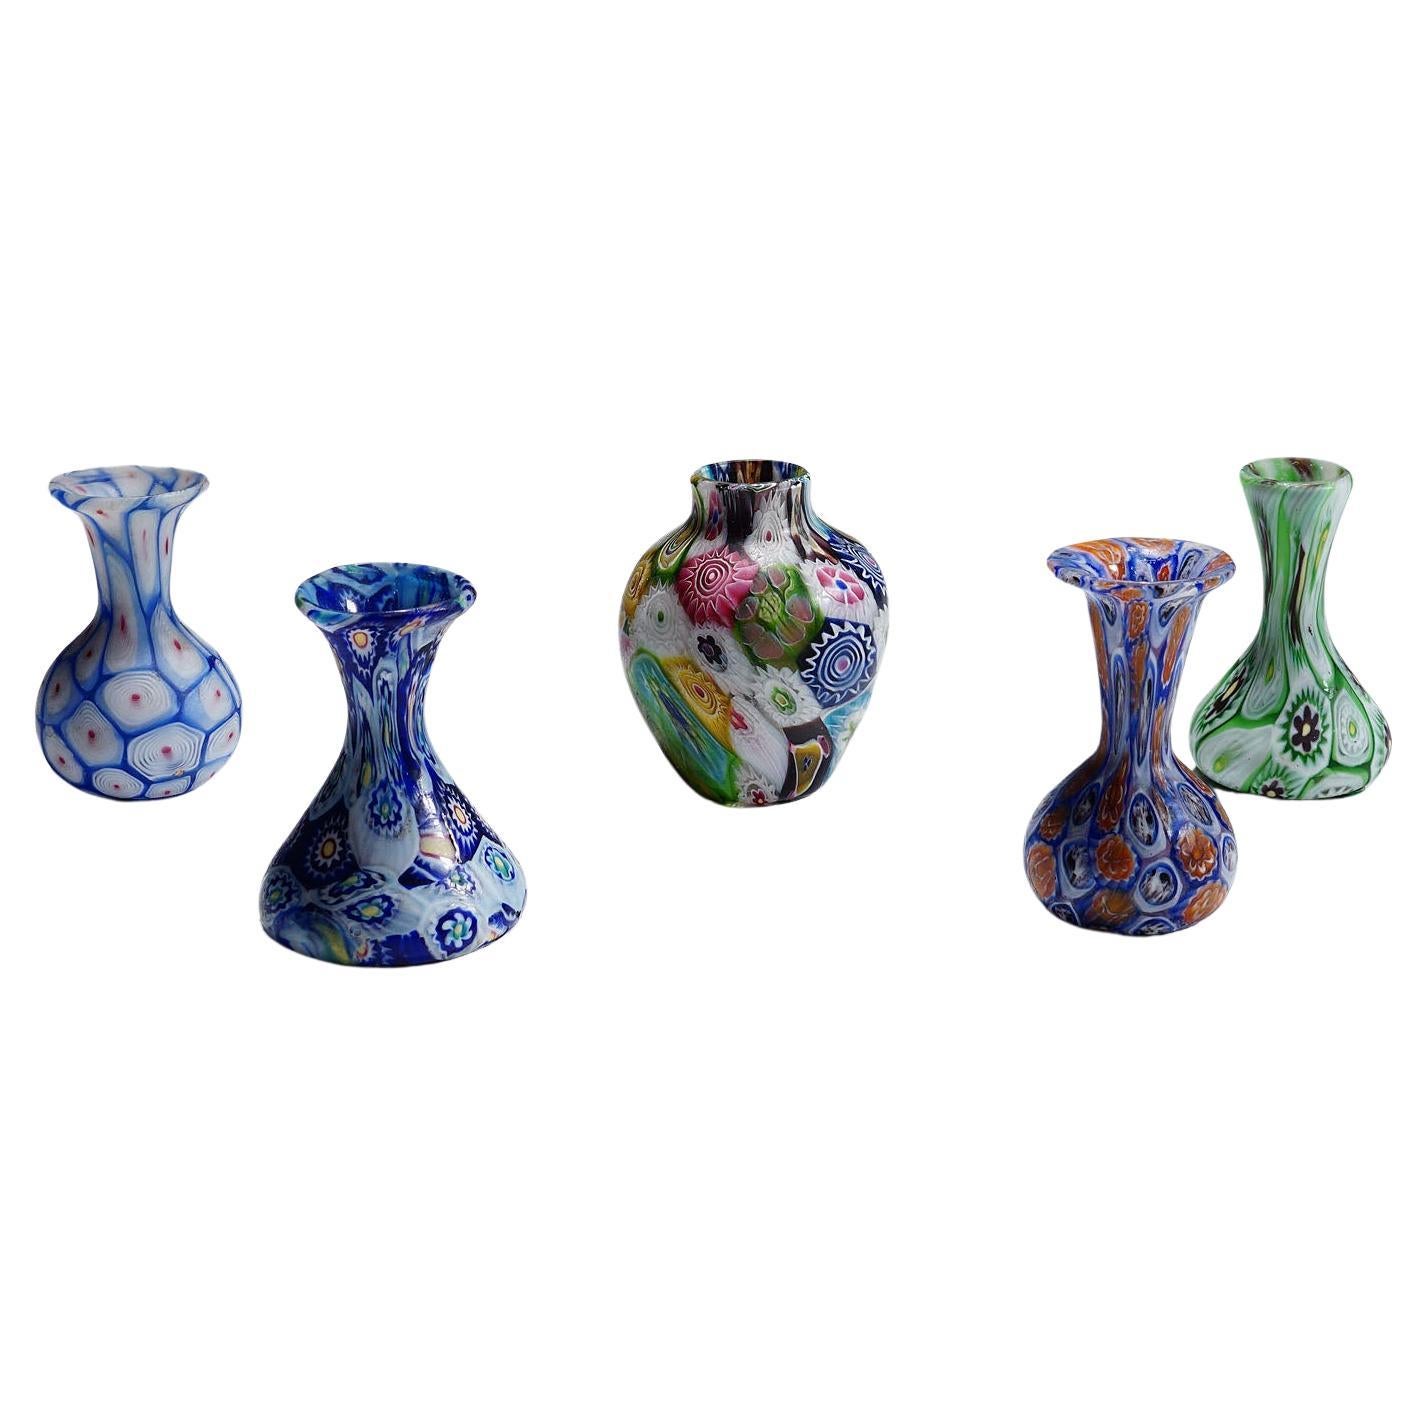 Set of Five Antique Murrine Vases by Fratelli Toso, Murano